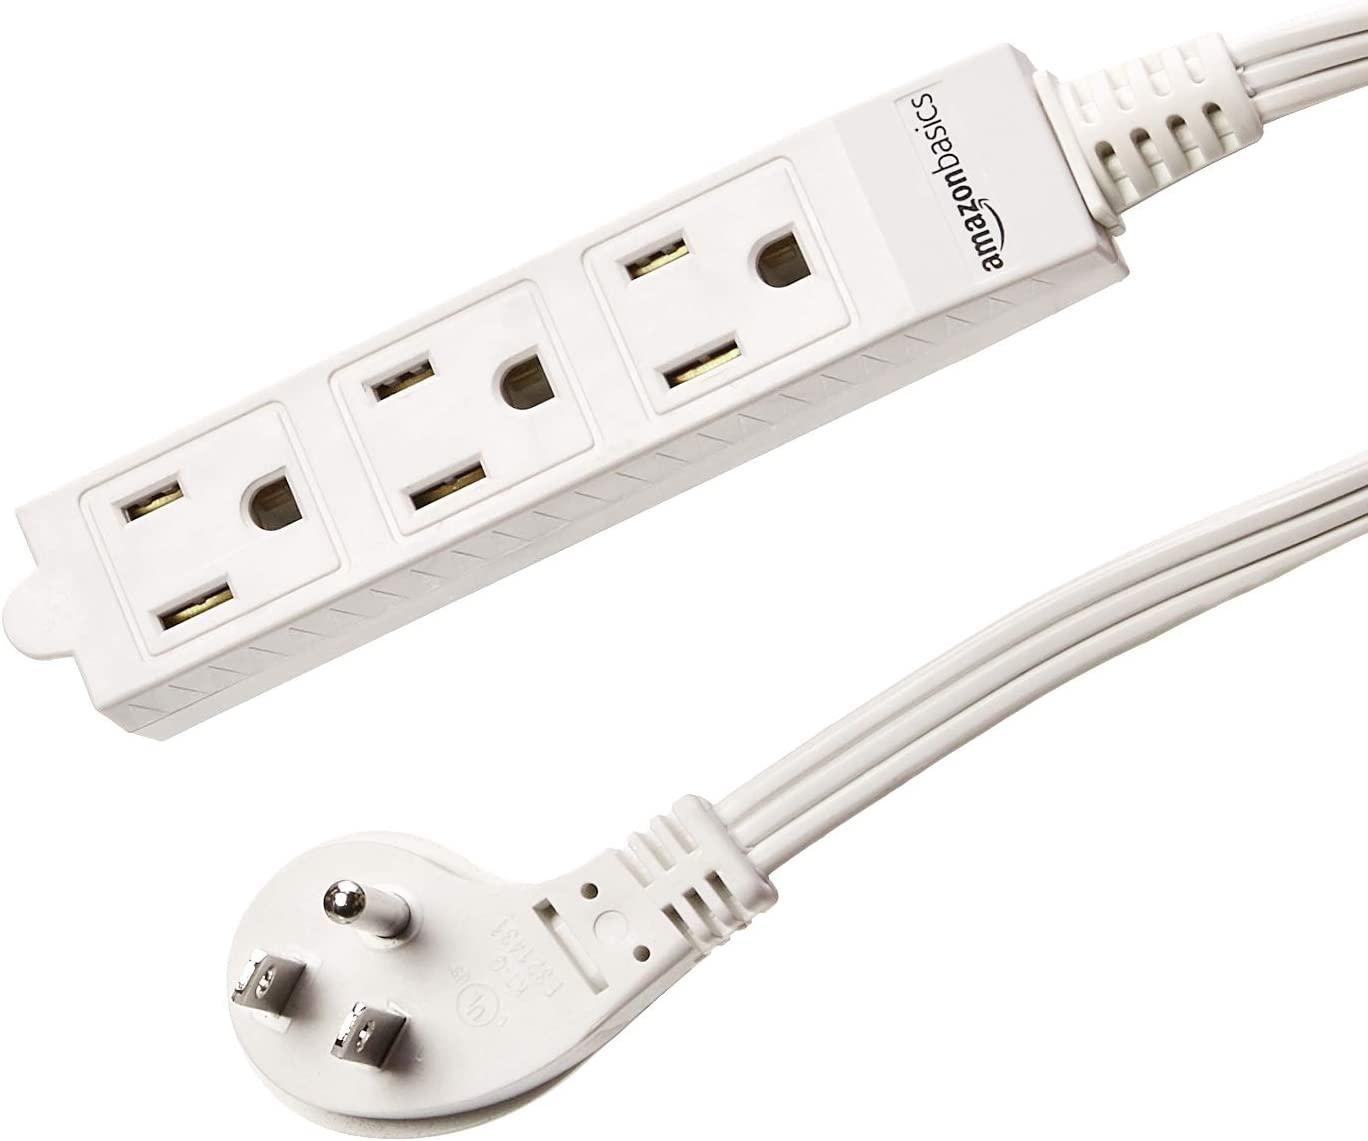 Amazon Basics Indoor 6ft Extension Cord Power Strip 2 Pack for $7.49